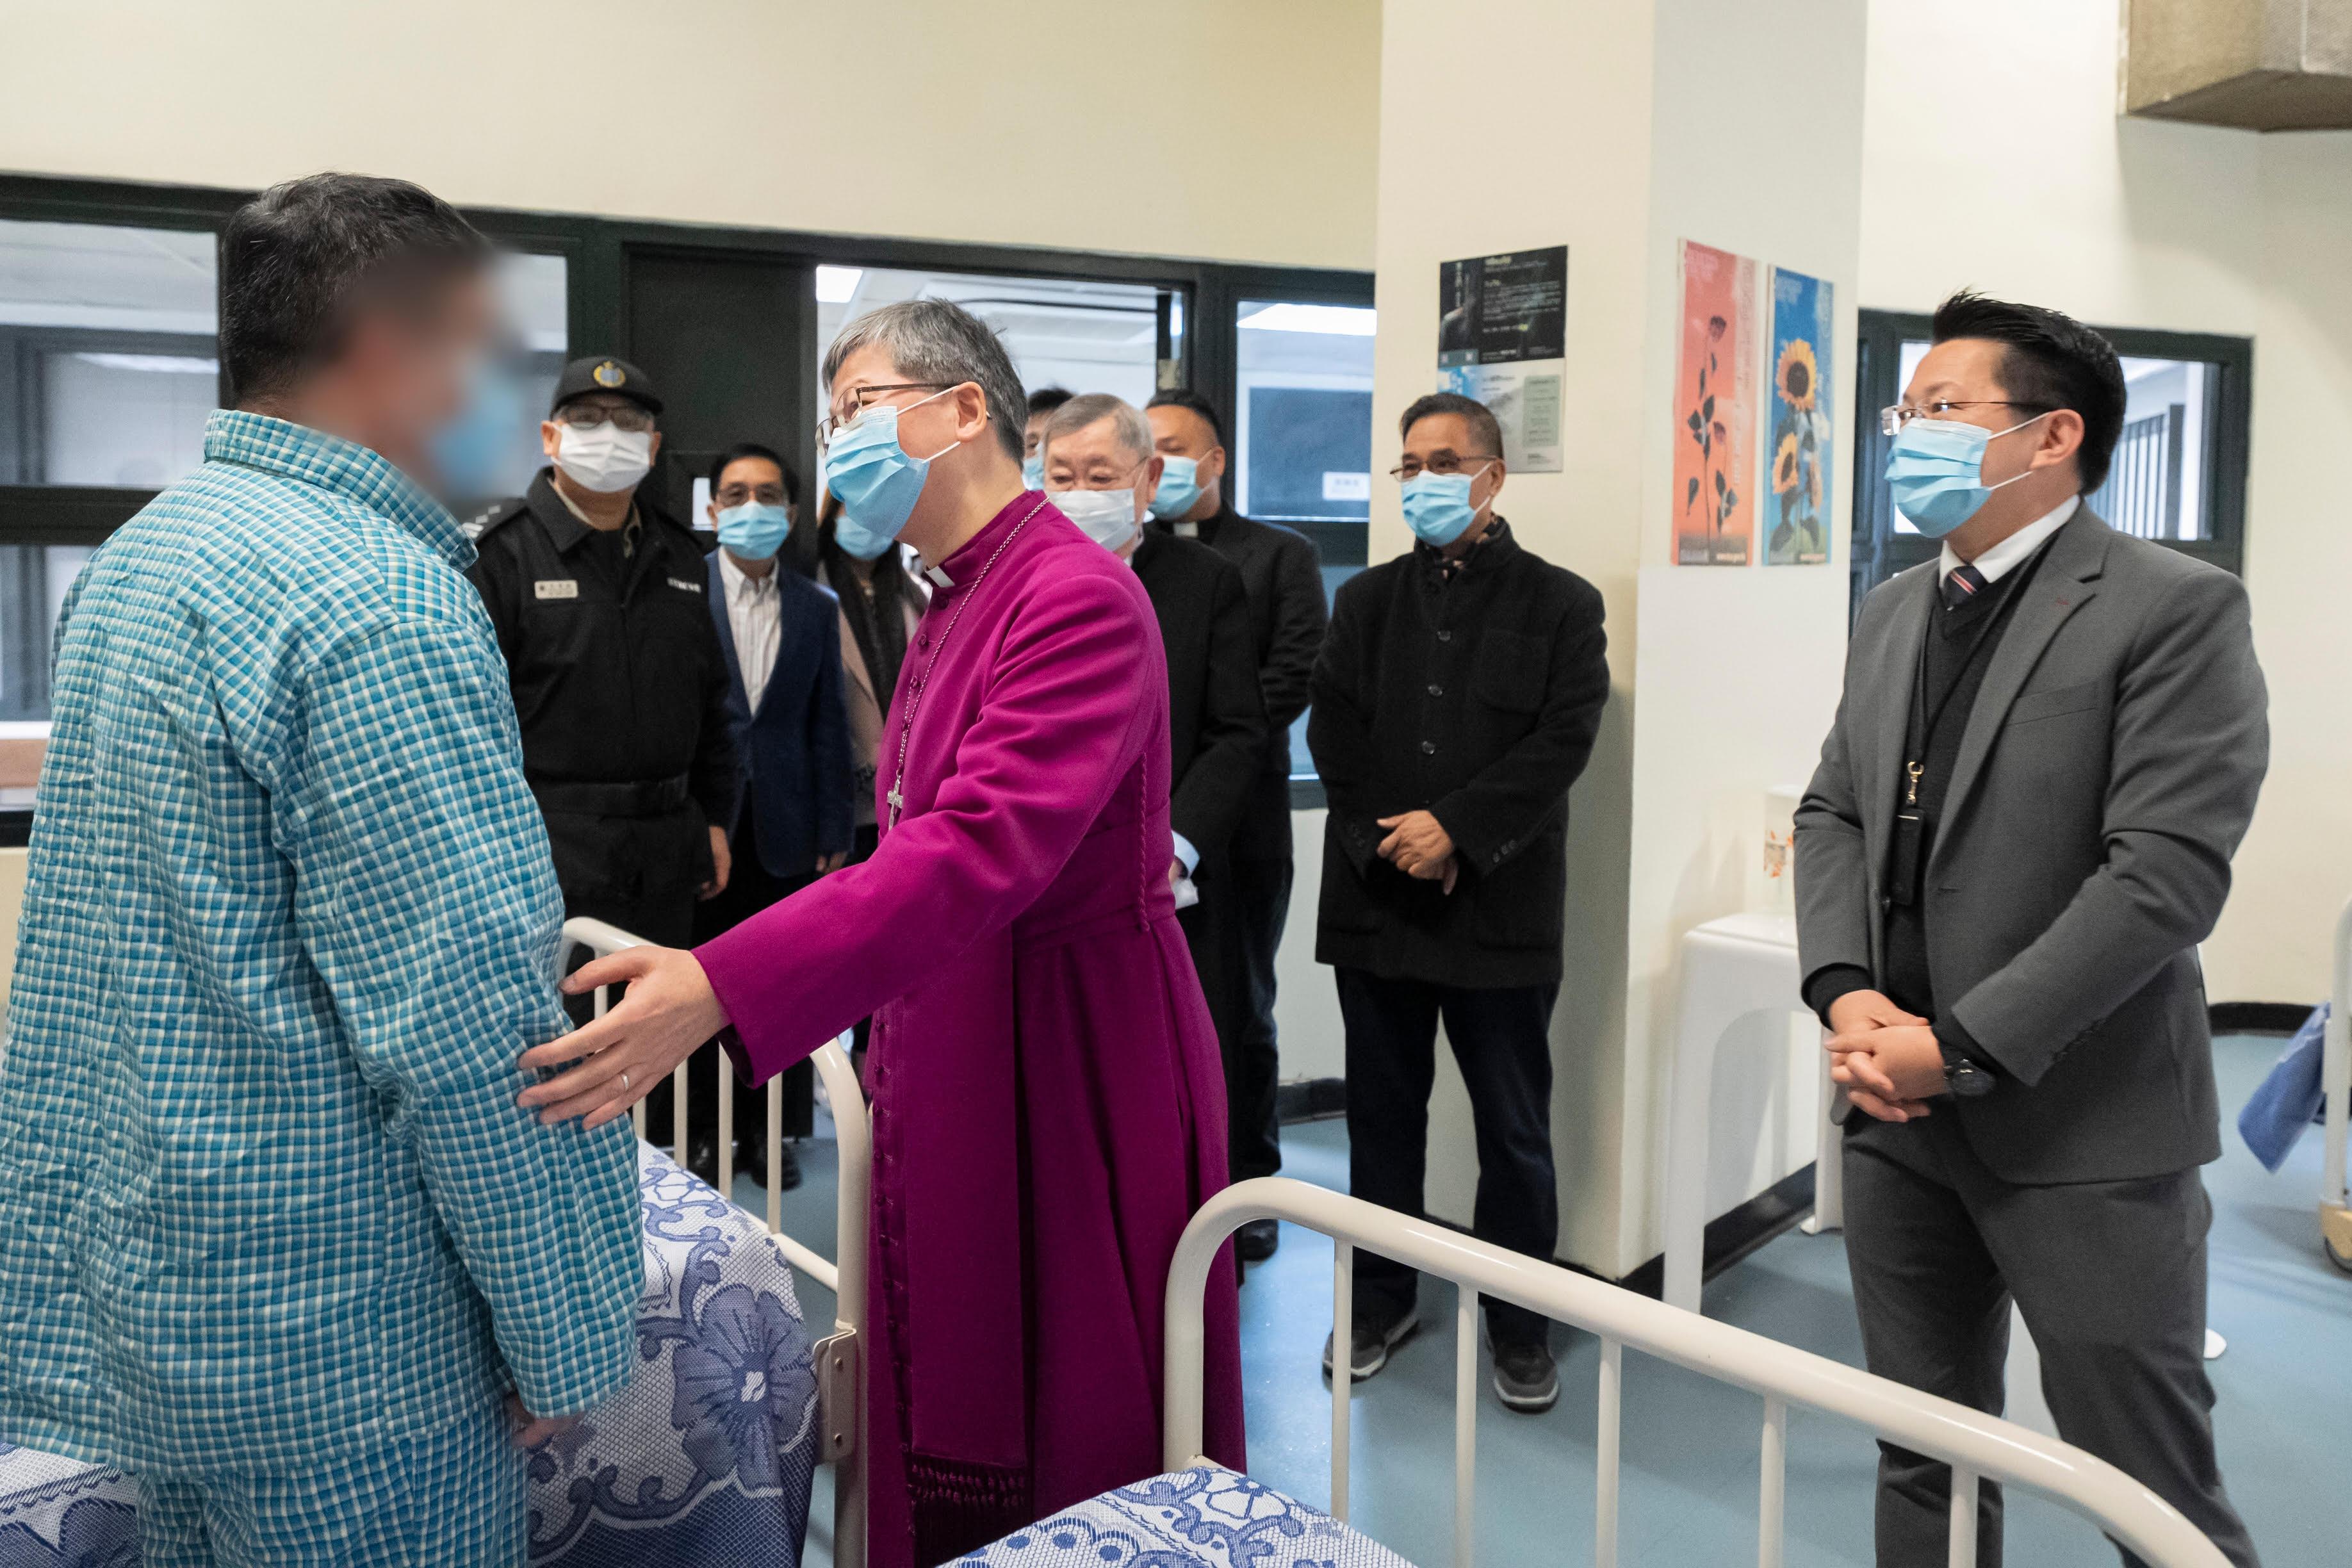 The Archbishop of Hong Kong, the Most Reverend Andrew Chan (front row, centre), accompanied by the Deputy Commissioner of Correctional Services (Operations and Strategic Development), Mr Ng Chiu-kok (front row, right), visited the hospital in Pak Sha Wan Correctional Institution to convey his sympathy and support to the sick persons in custody on December 21.